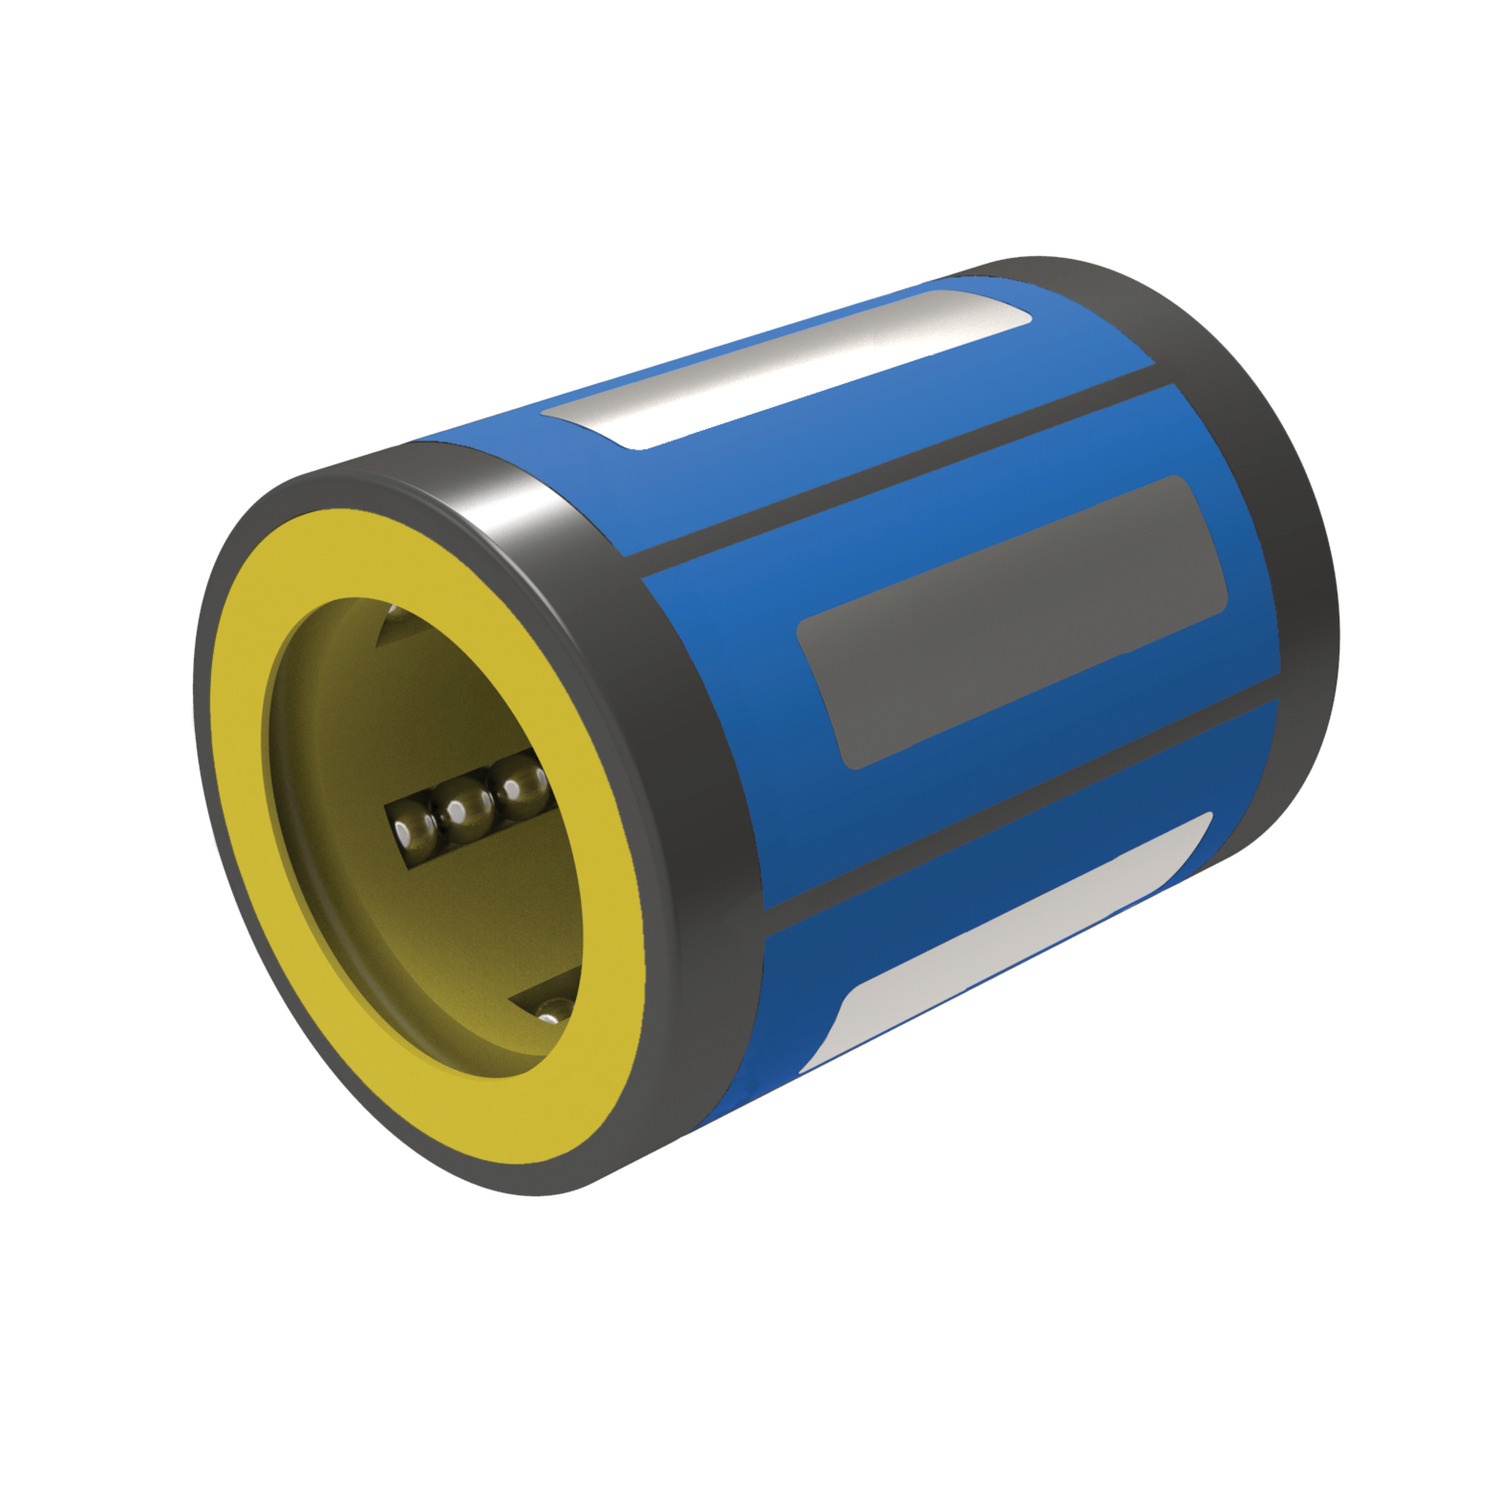 Compact Linear Ball Bushings Low cost, compact. Durable plastic body with corrosion resistant hardened steel raceway segments.